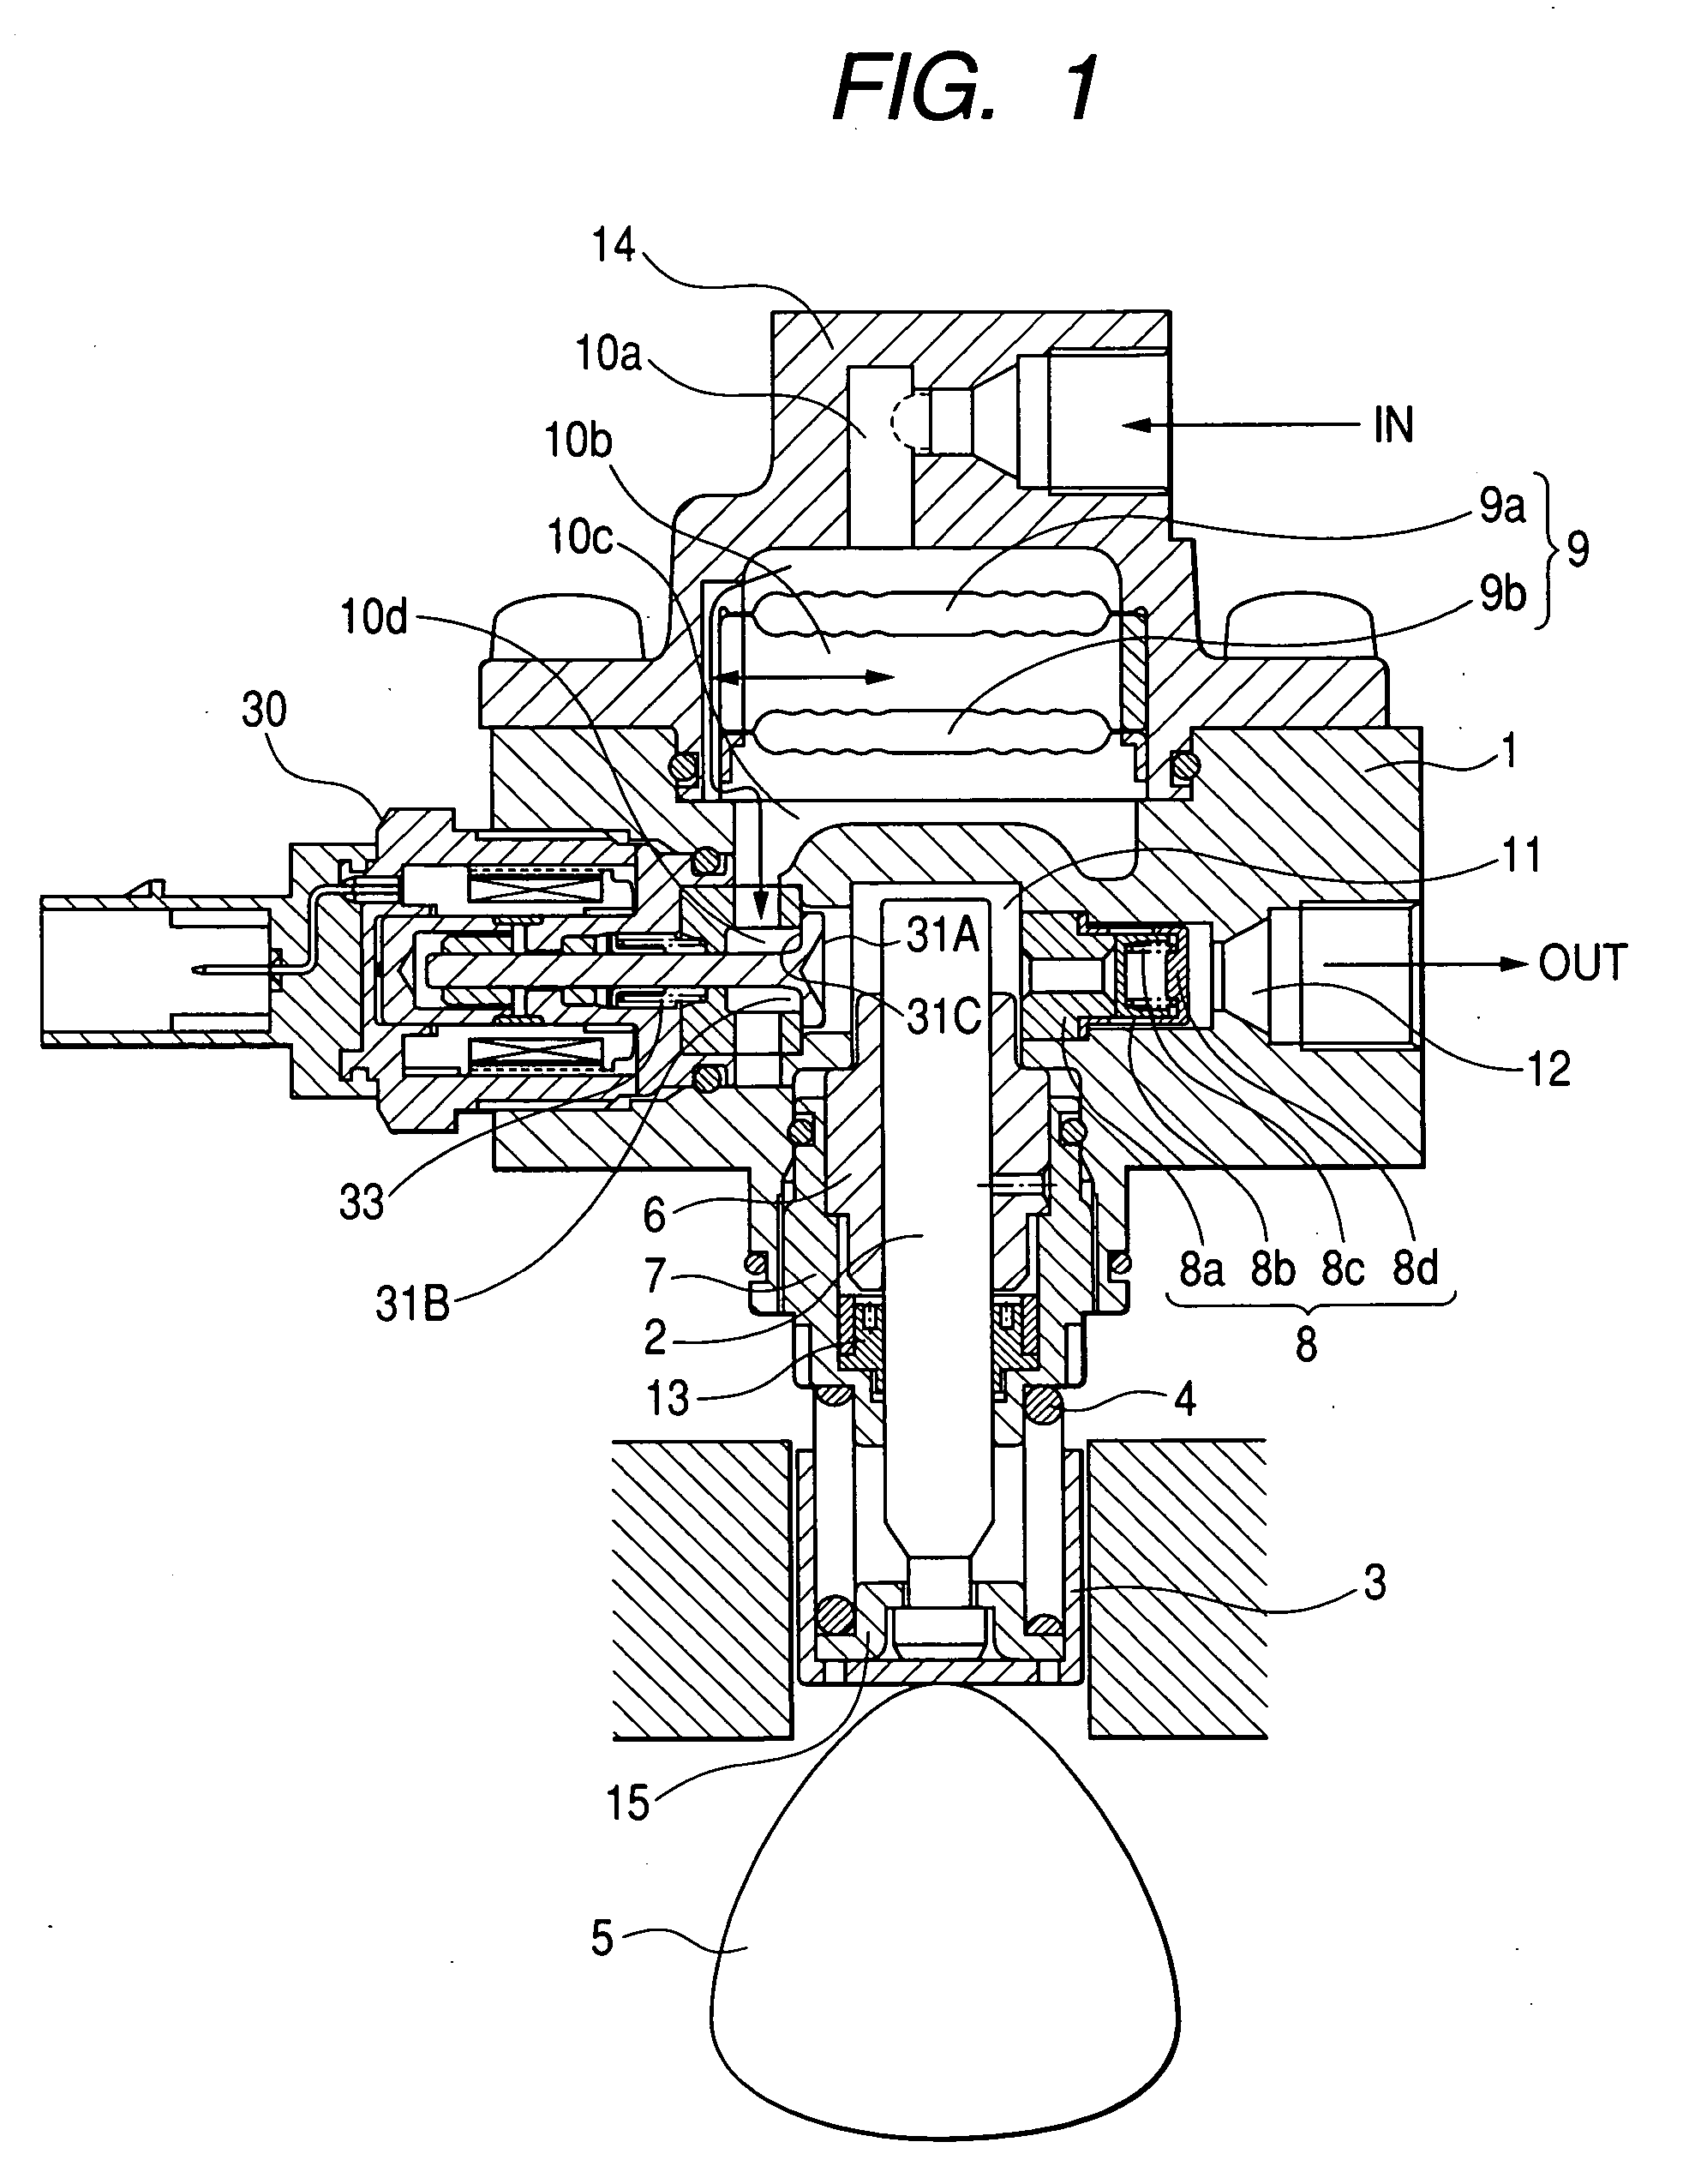 Electromagnetic drive mechanism and a high-pressure fuel supply pump